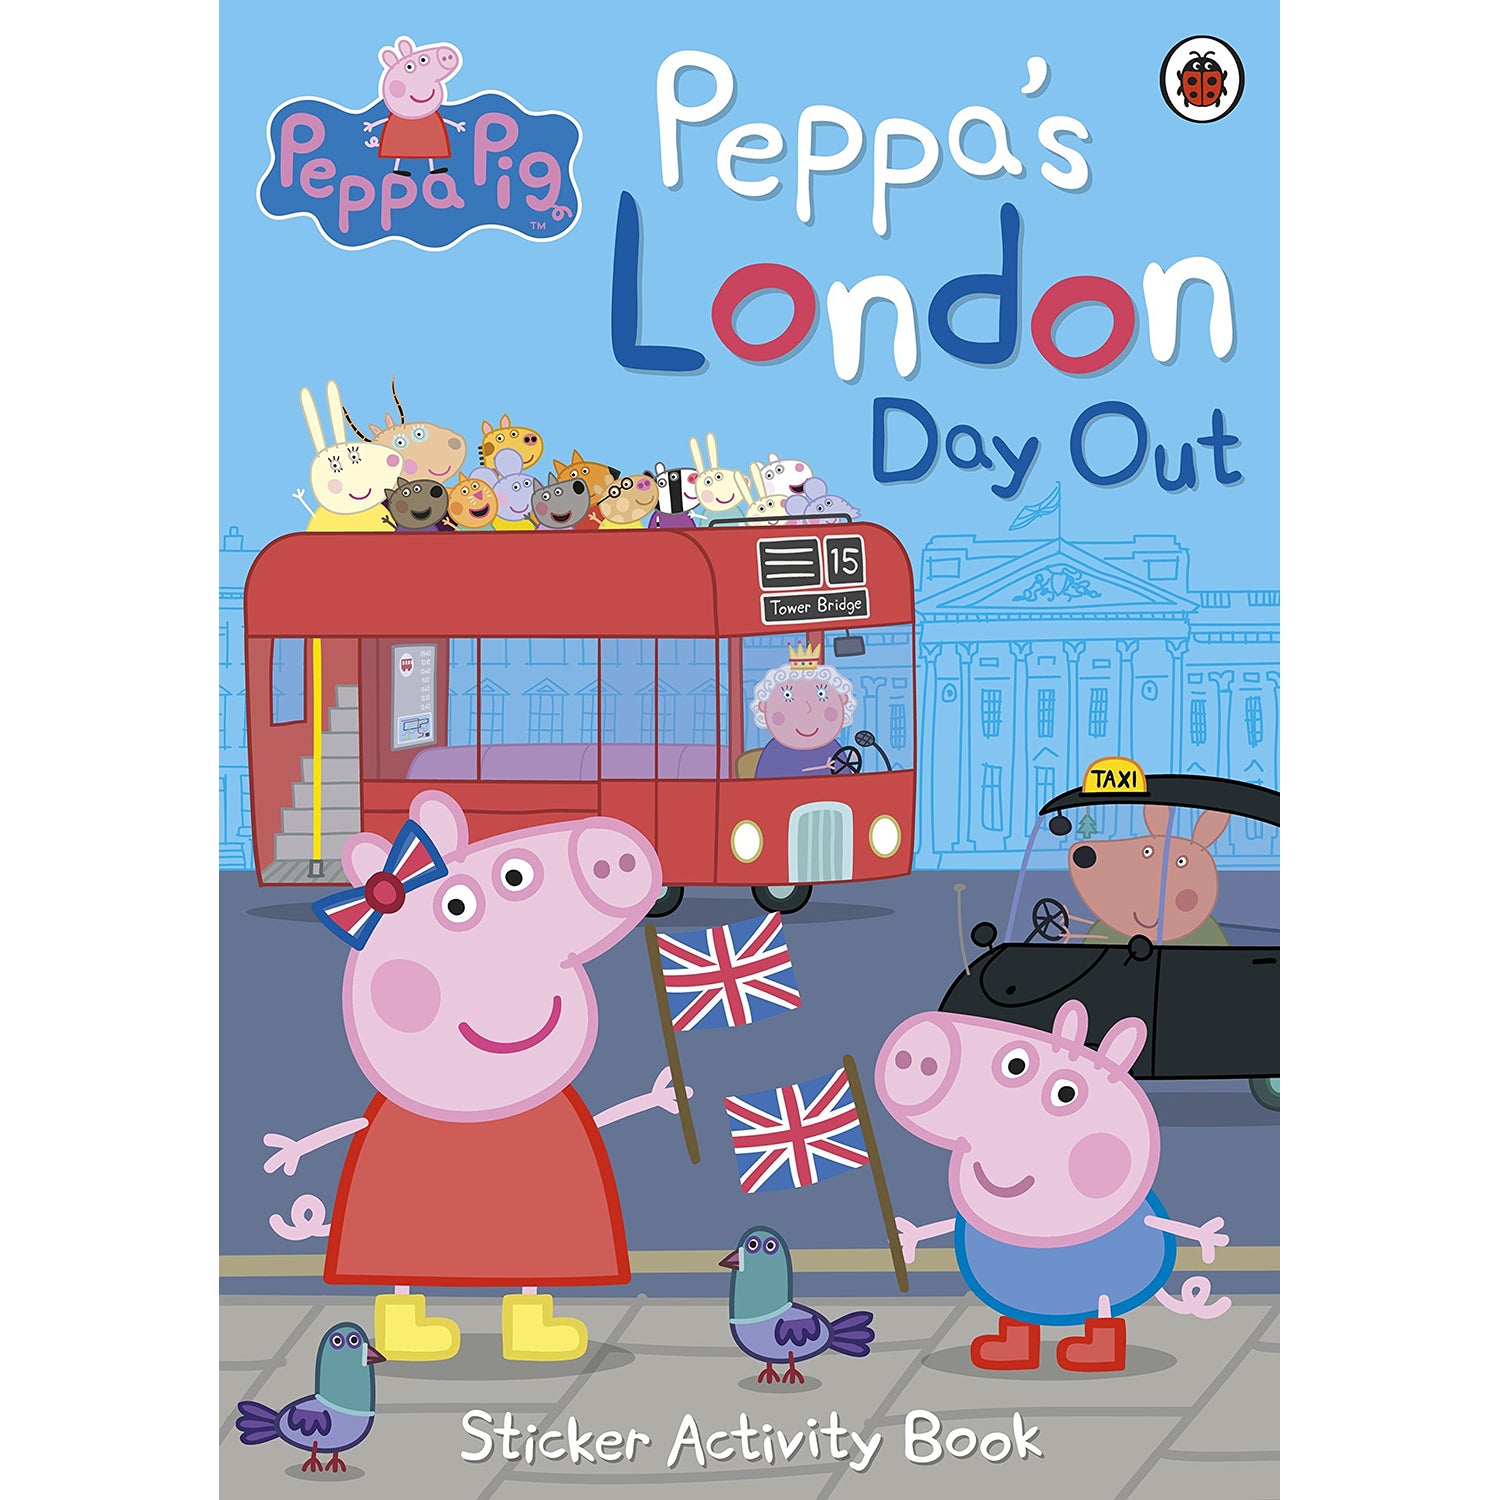 Peppa Pig's London Day Out Book Cover